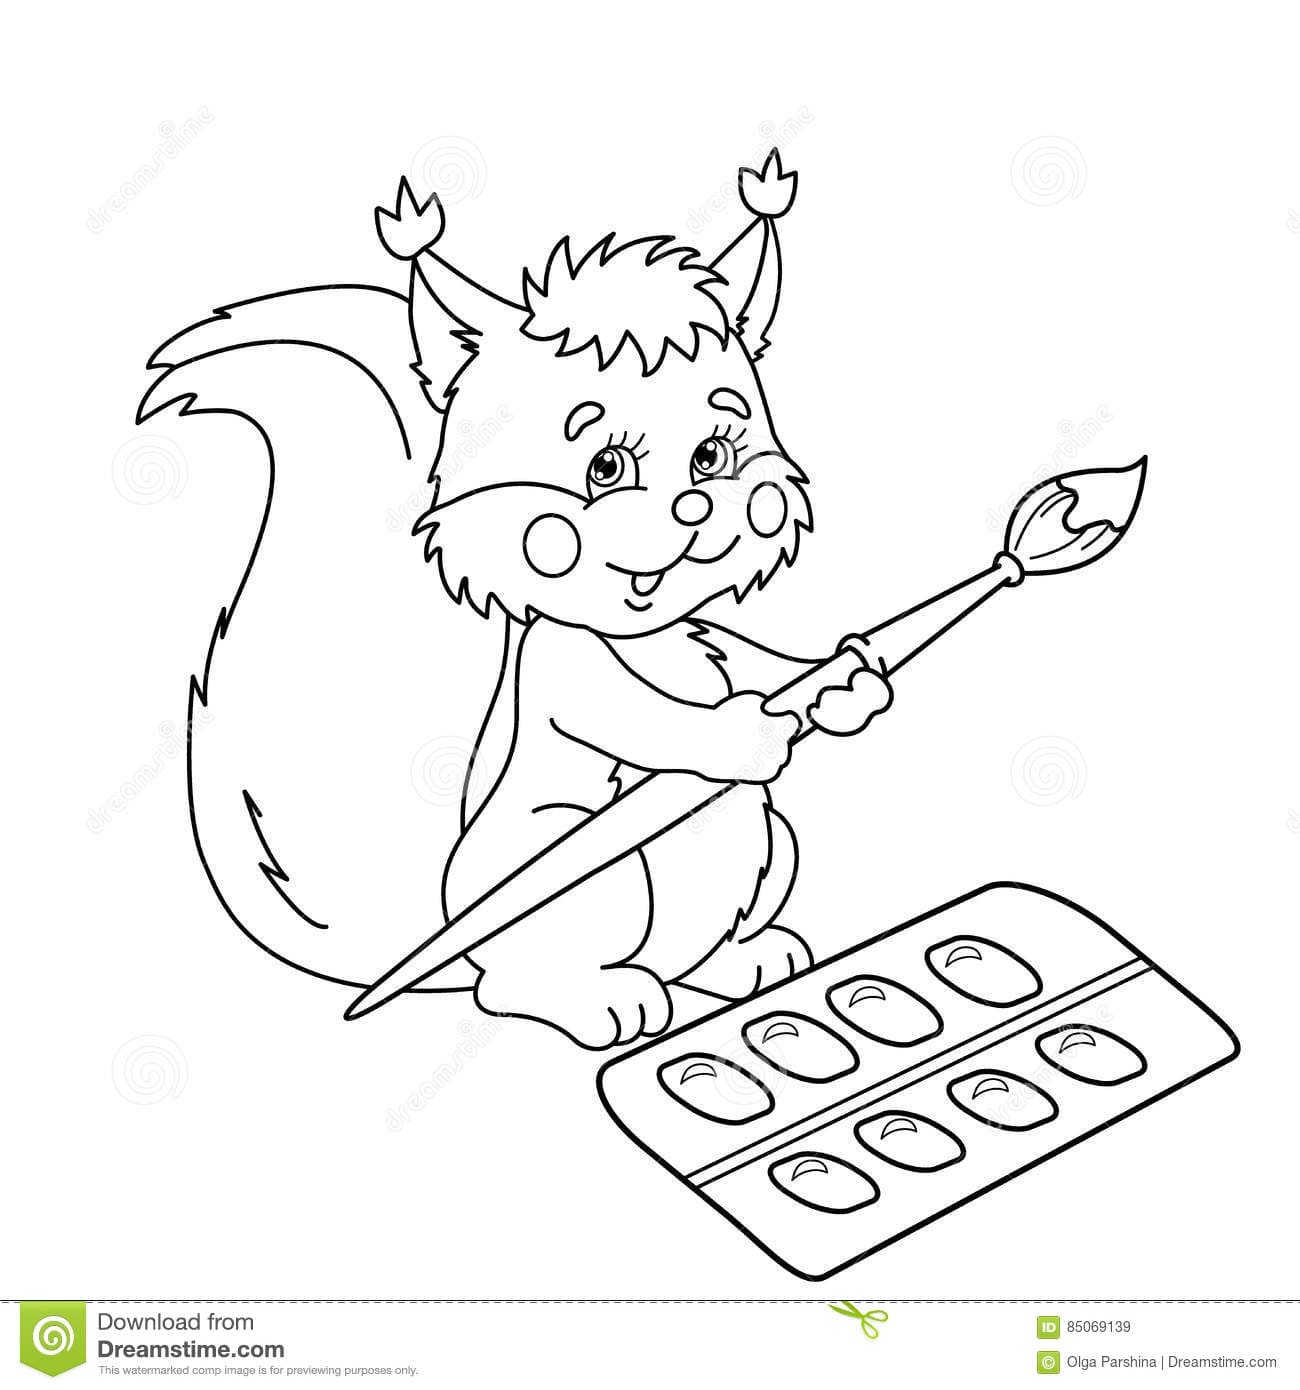 Coloring Page Outline Of Cartoon Squirrel With Brushes And Paints Coloring Page